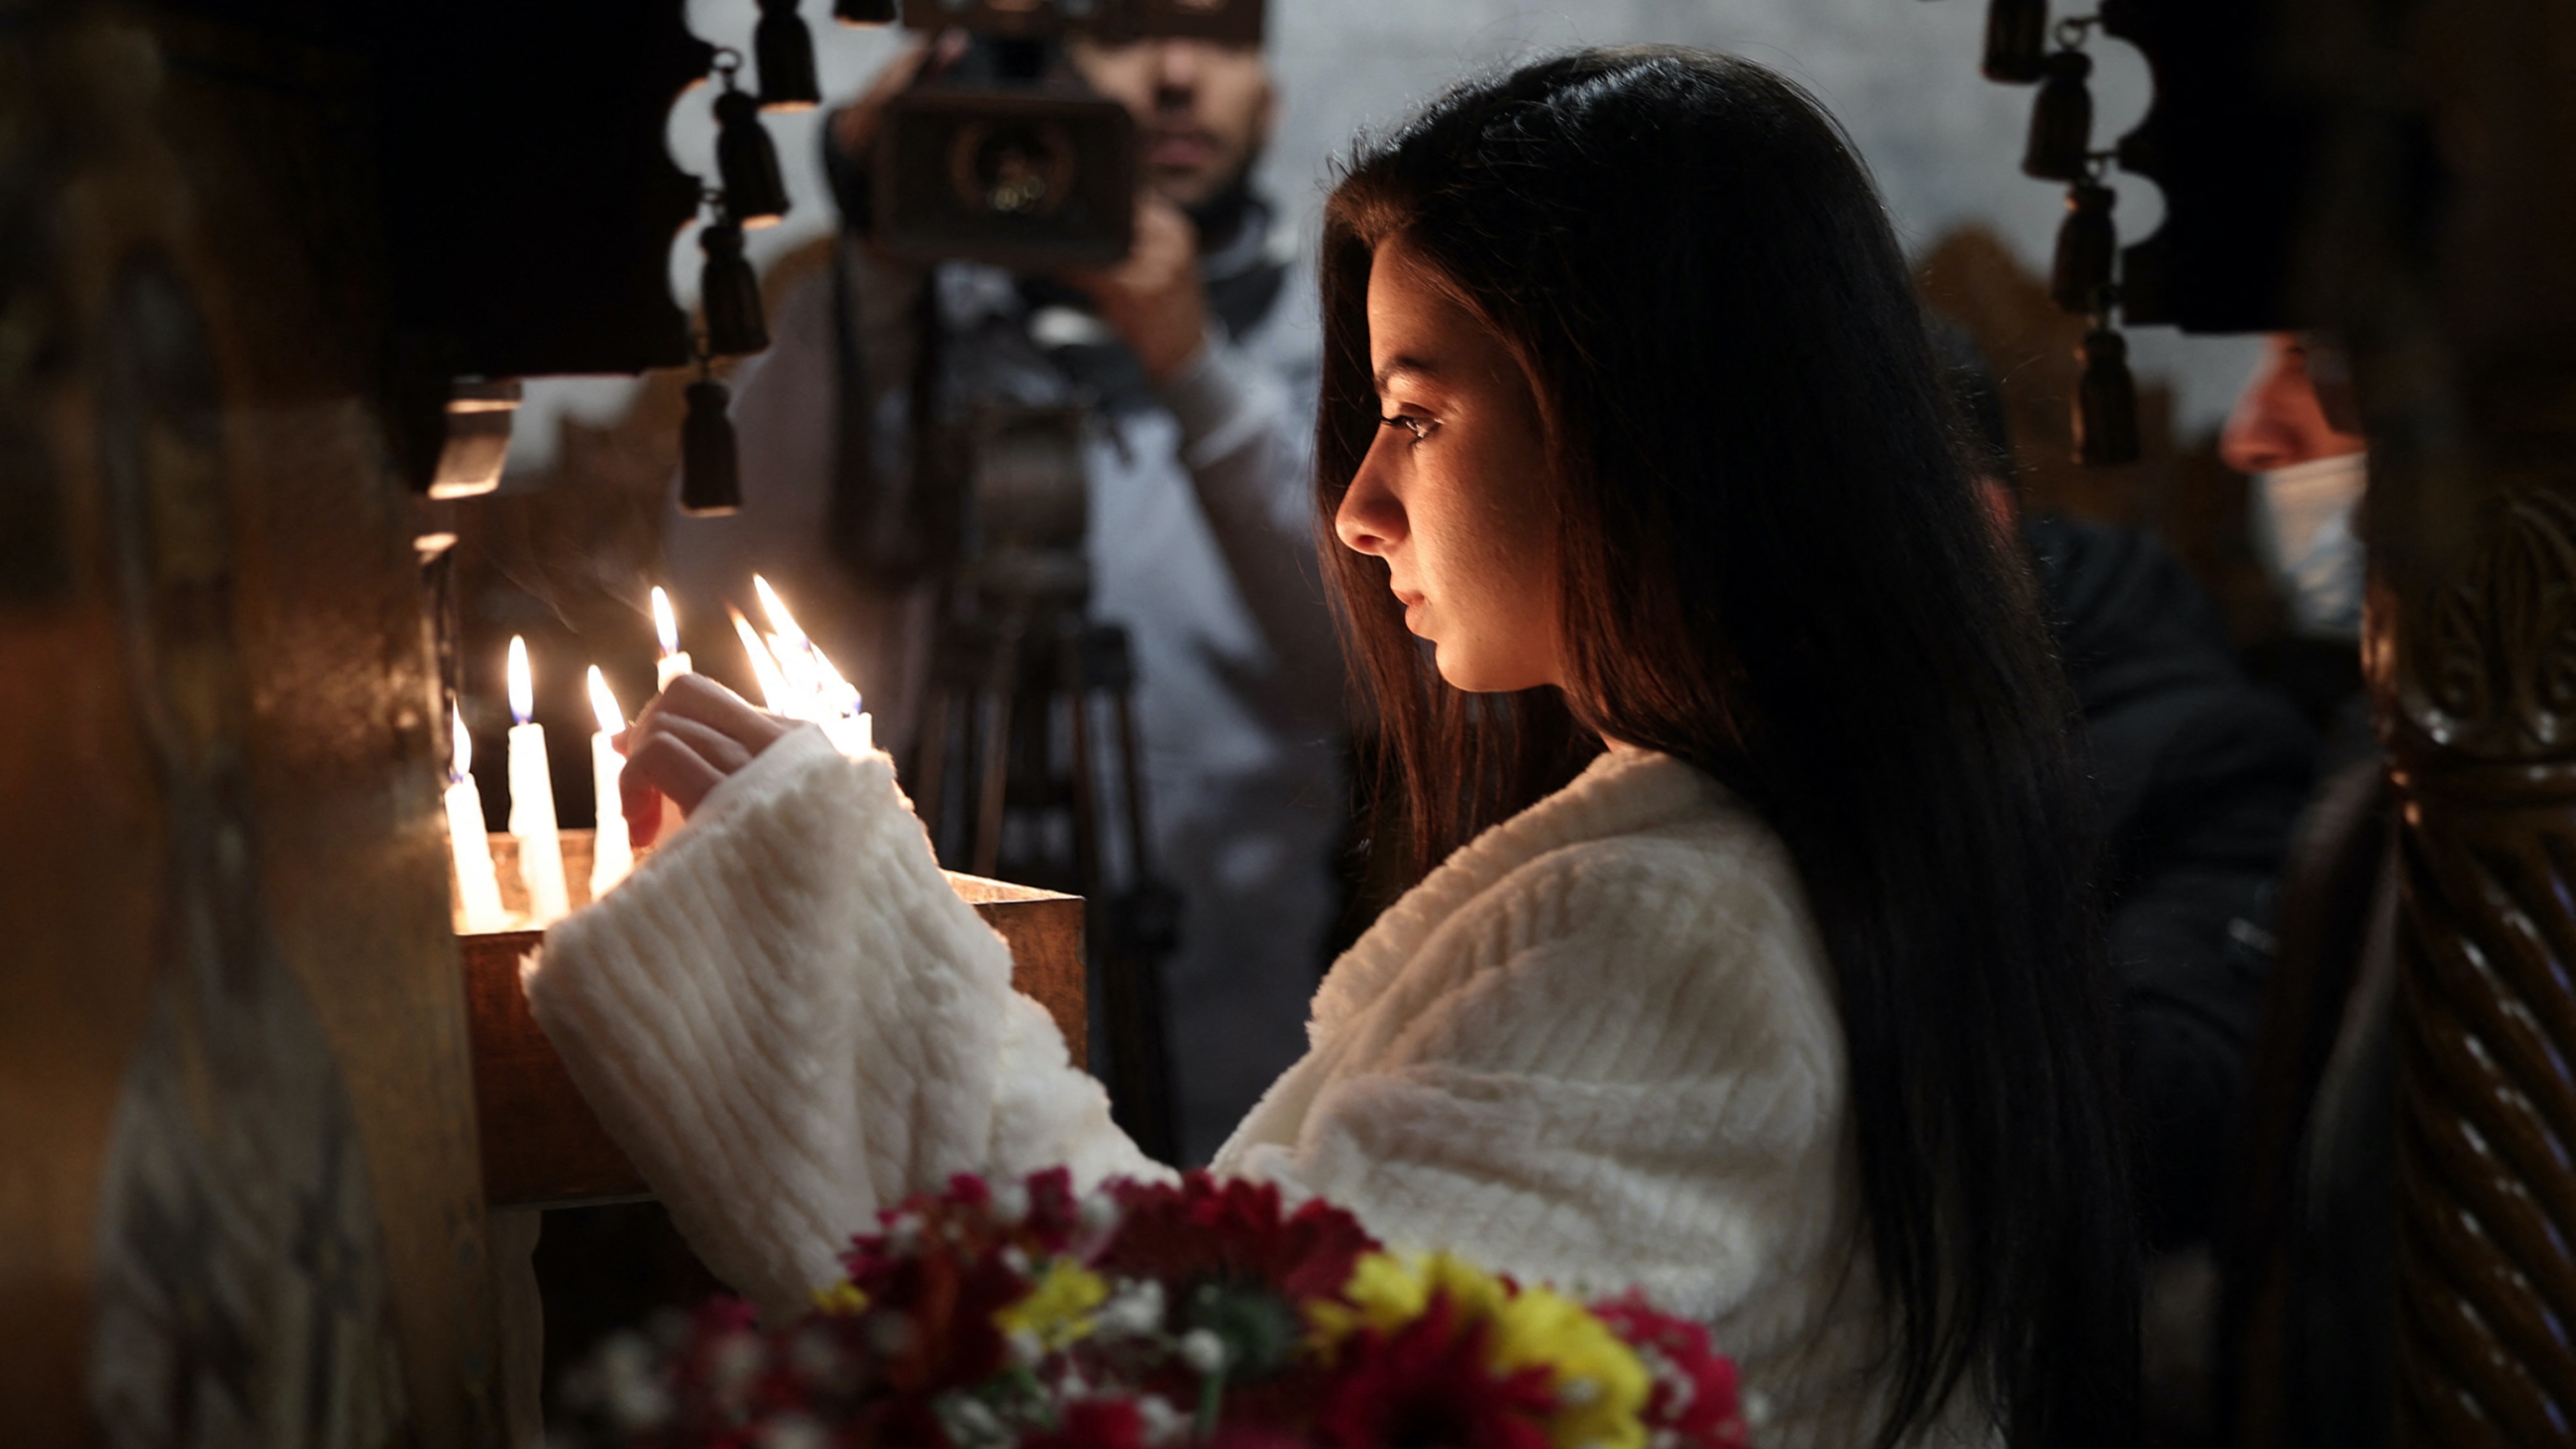 A Palestinian worshipper lights a candle during a Christian Orthodox Christmas mass at the Saint Porphyrios Greek Orthodox church in Gaza City on 7 January 2022 (AFP)